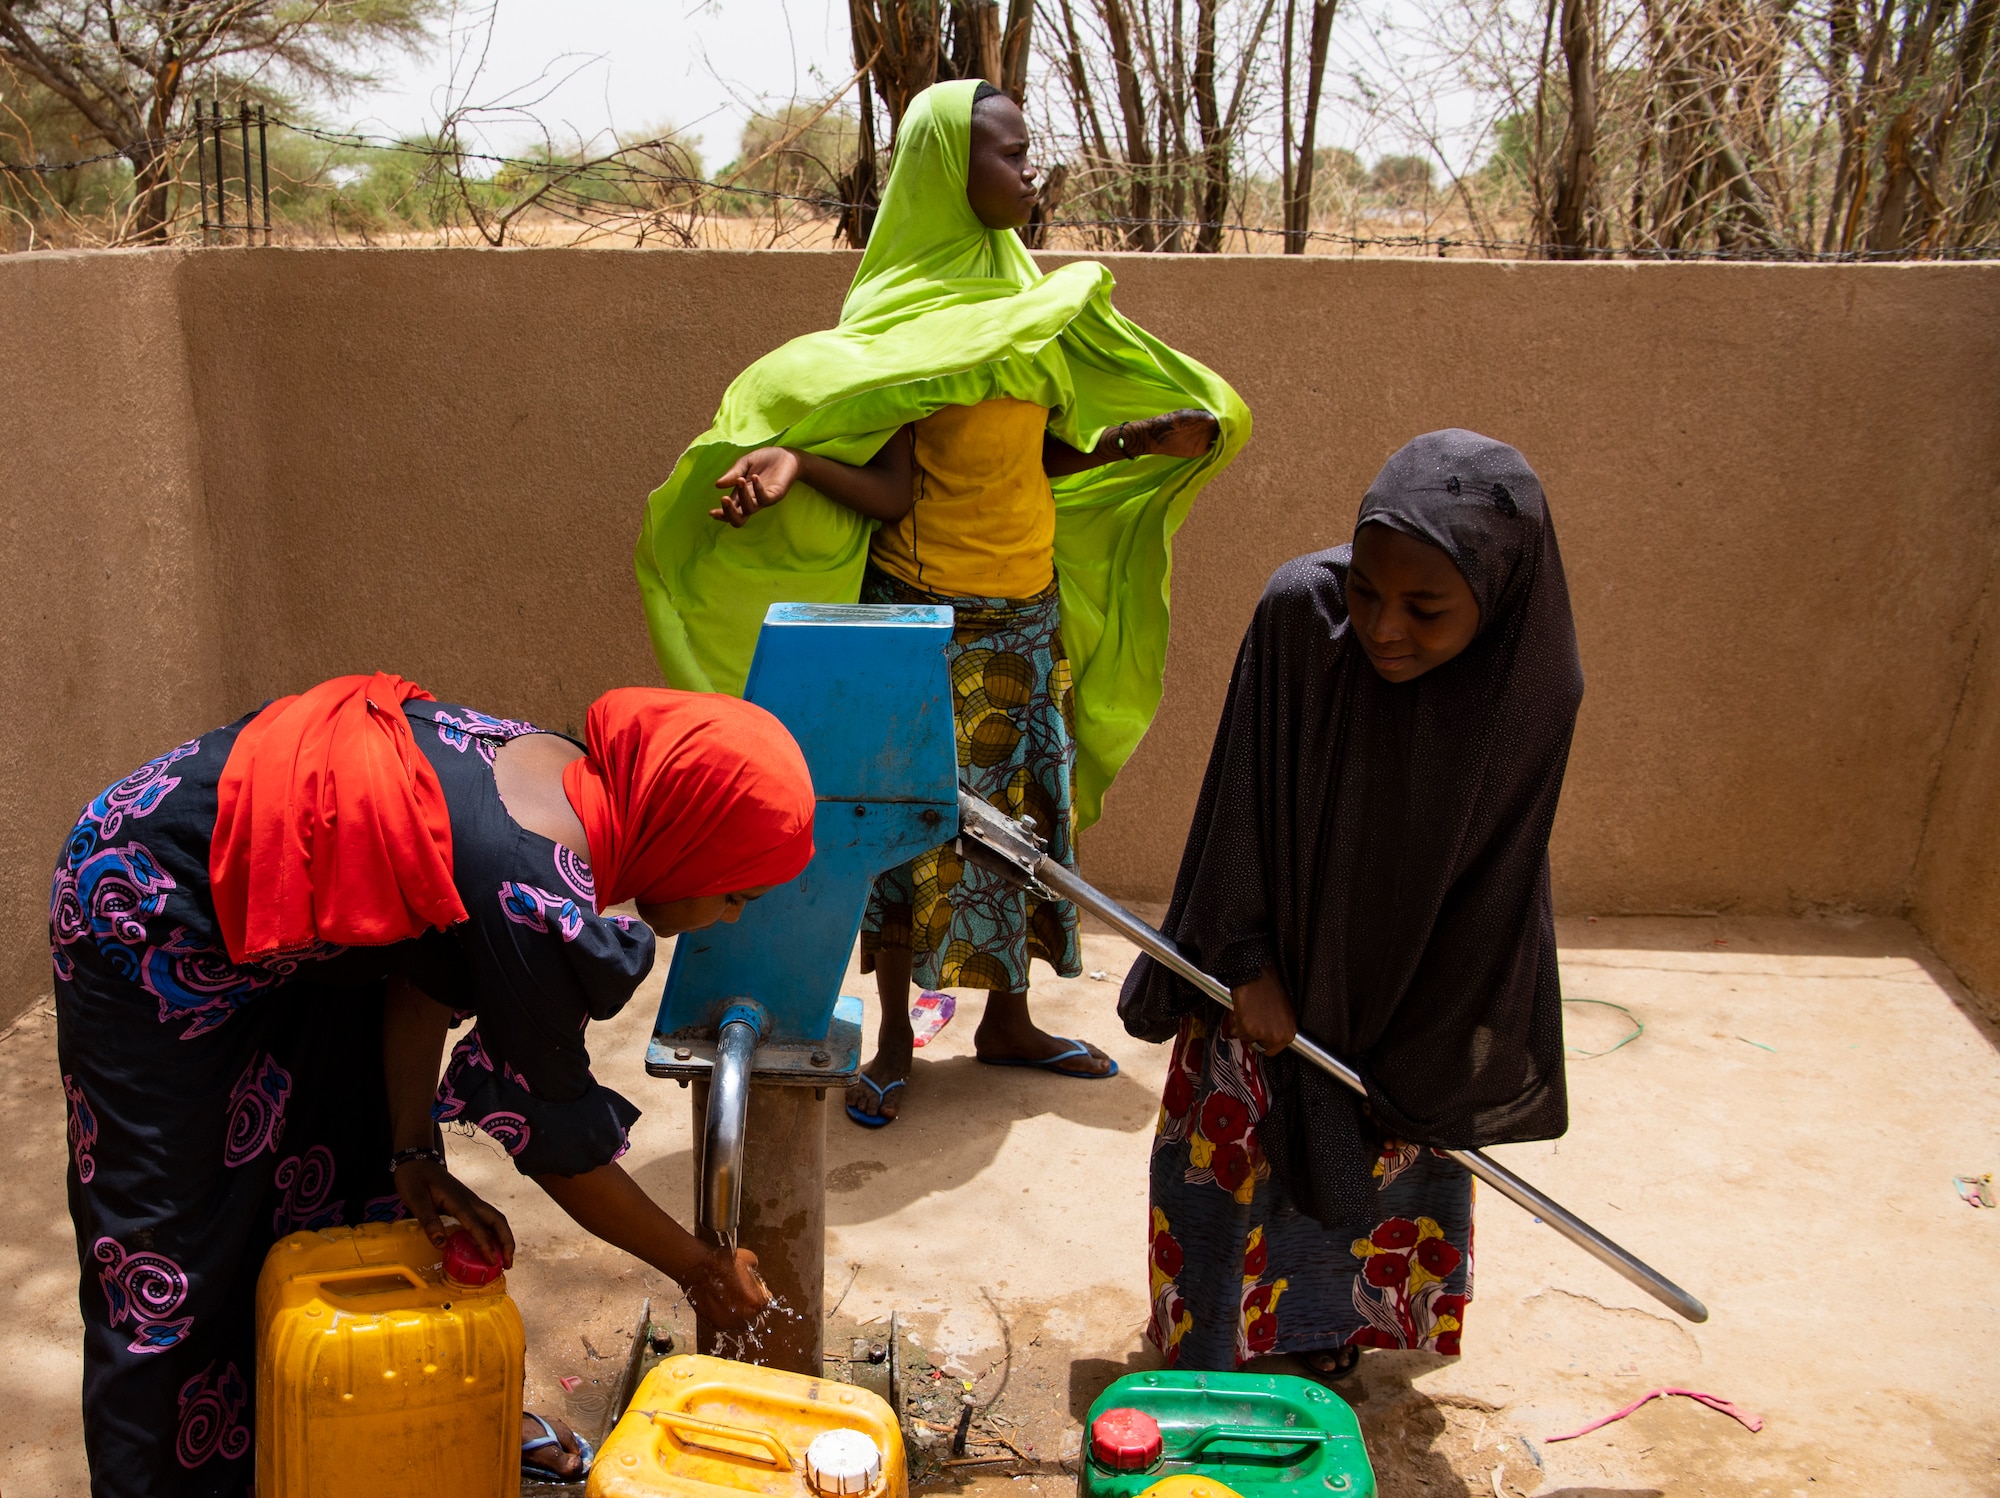 Nigerien women pump water into containers at the village well. The well is currently being converted into a solar powered well, to eliminate the need to hand pump water. (U.S. Air Force photo by Tech. Sgt. Perry Aston)